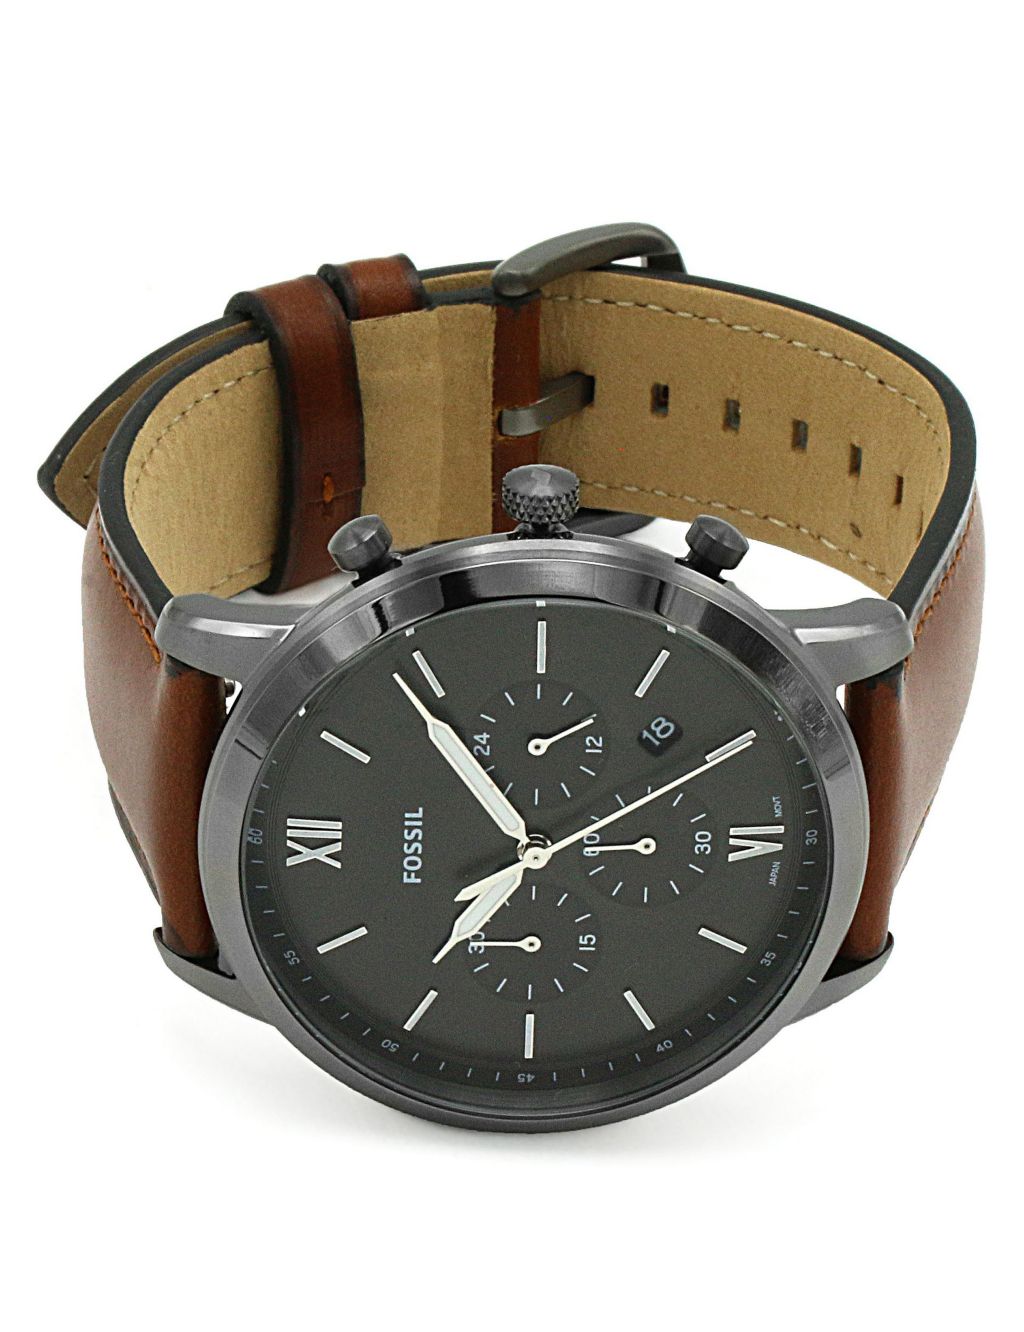 Fossil Neutra Chronograph Brown Leather Watch image 2